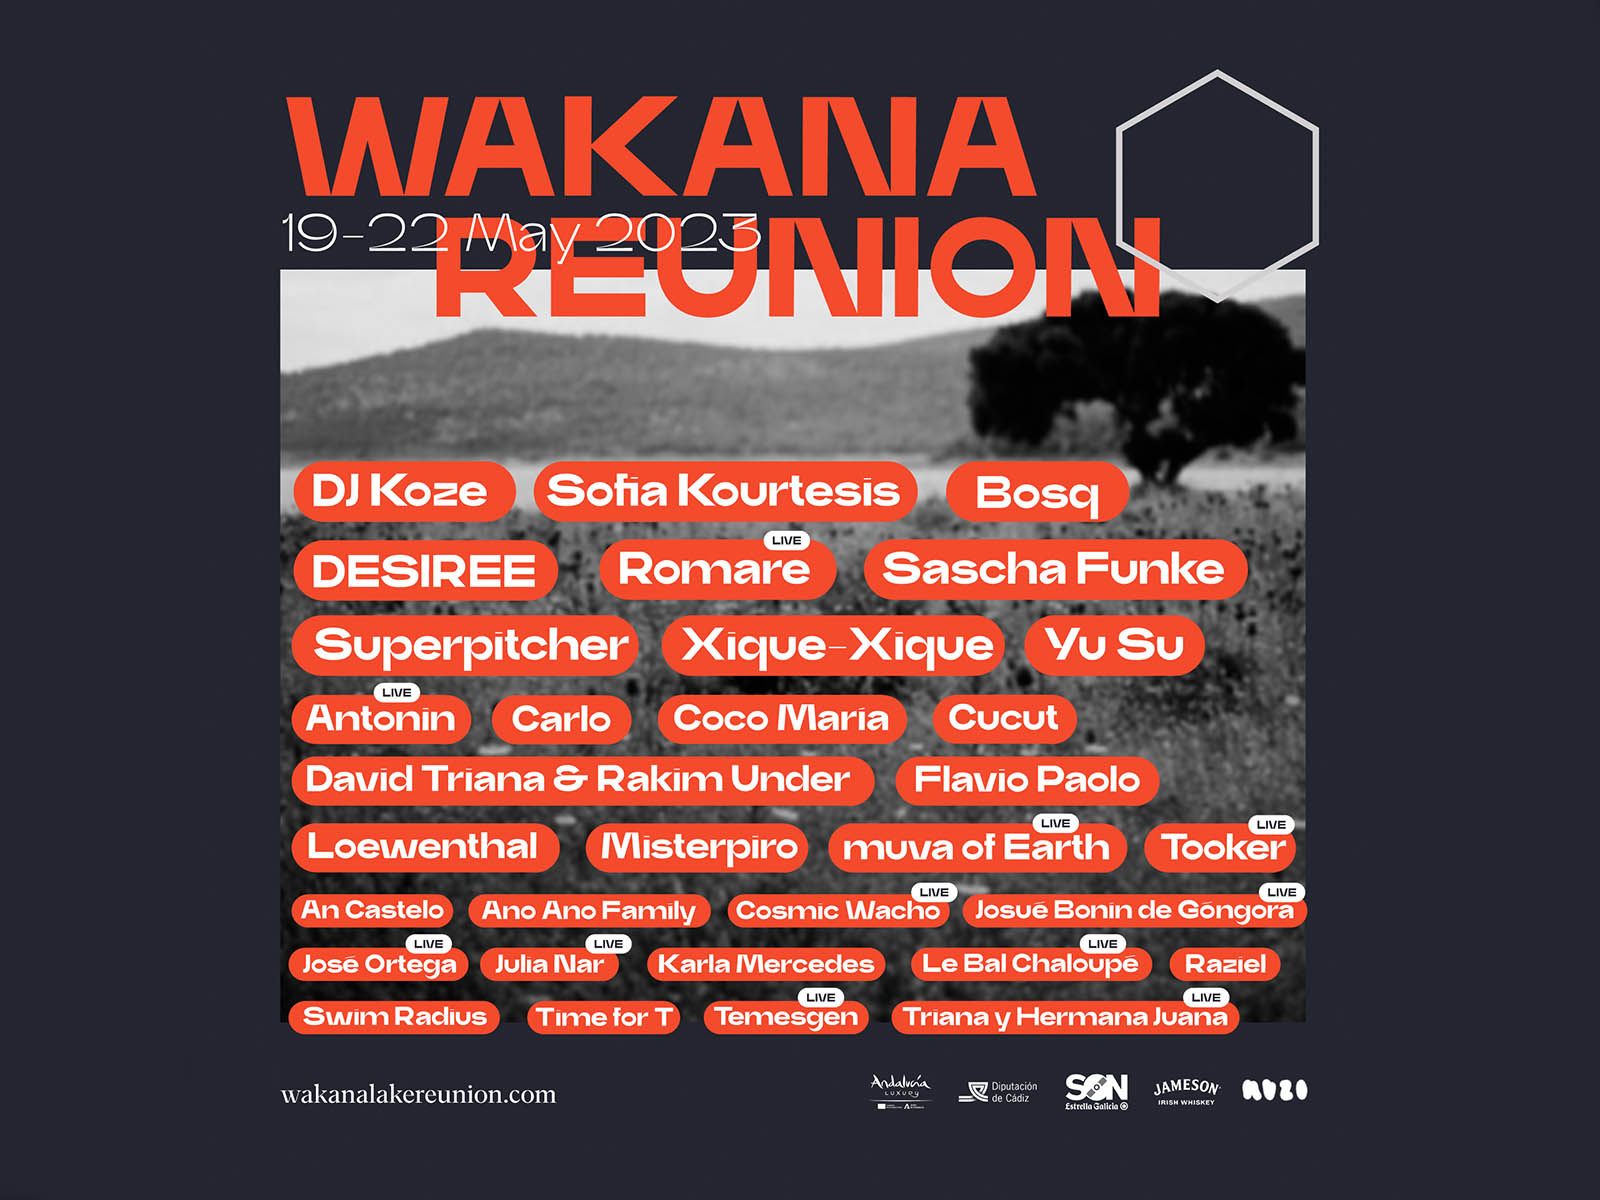 Wakana Reunion: this is the definitive line-up for its fourth edition